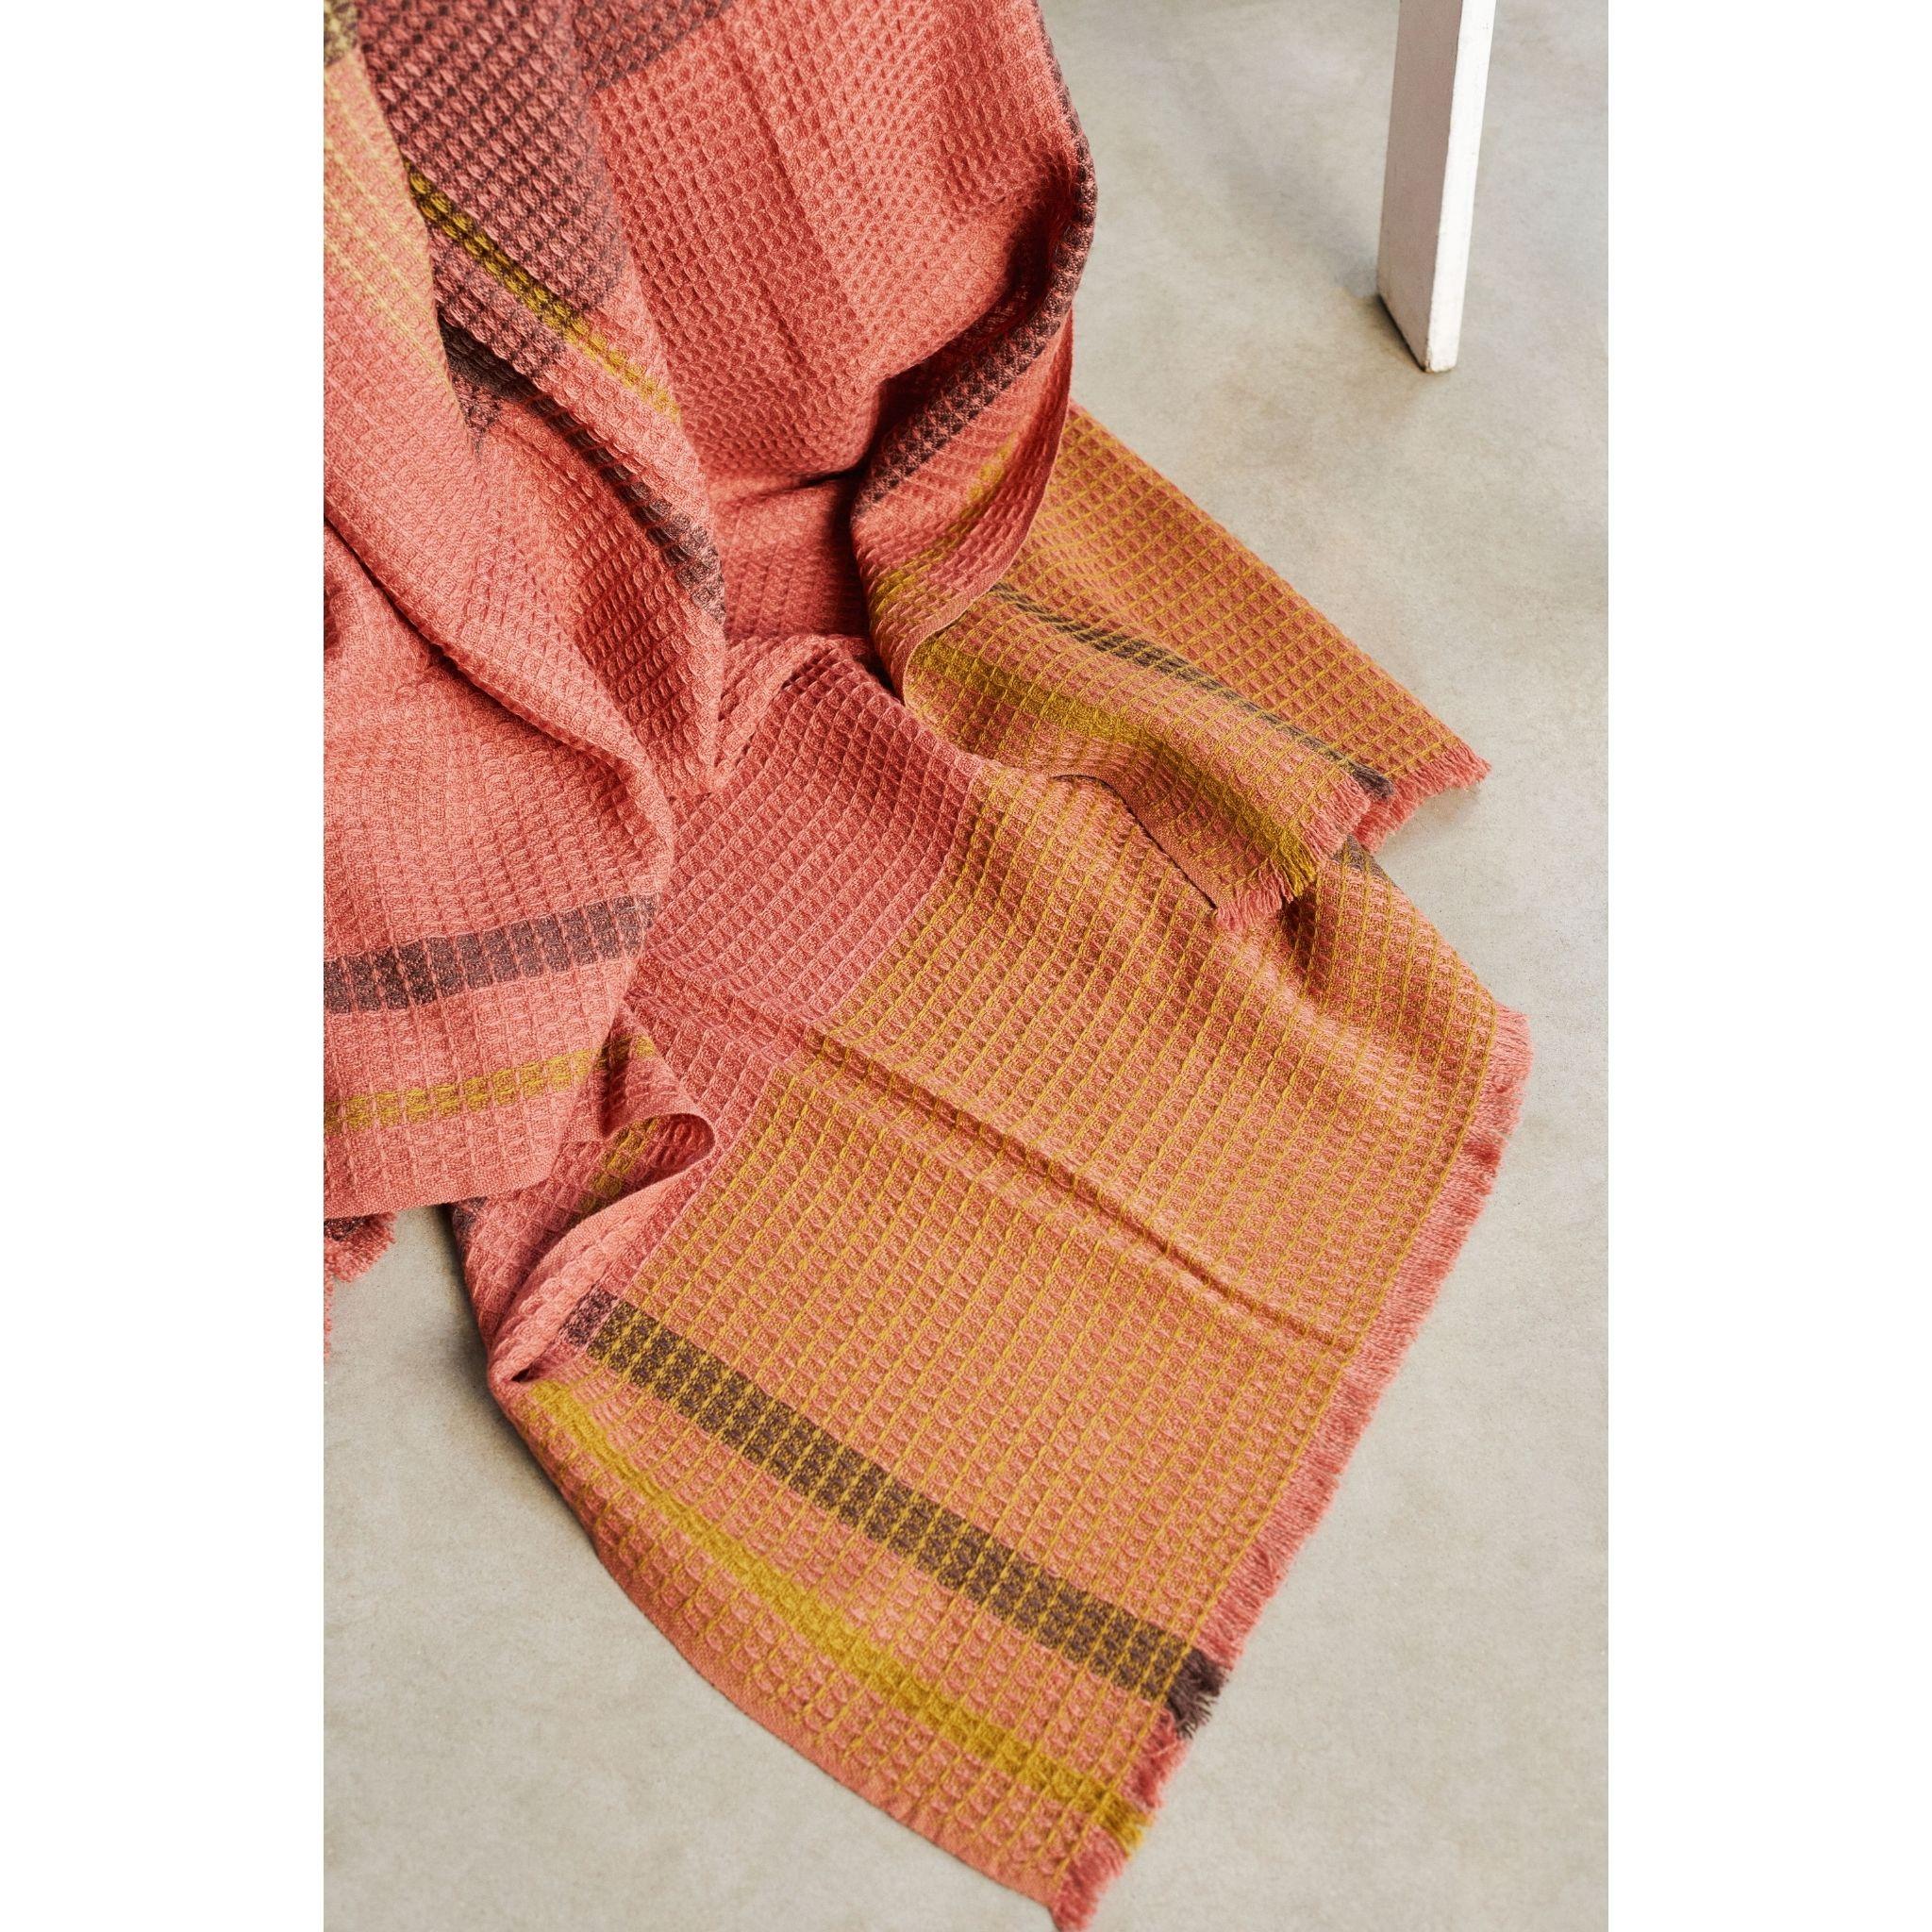 Cocoon Merino Waffle Handloom Throw  In New Condition For Sale In Bloomfield Hills, MI